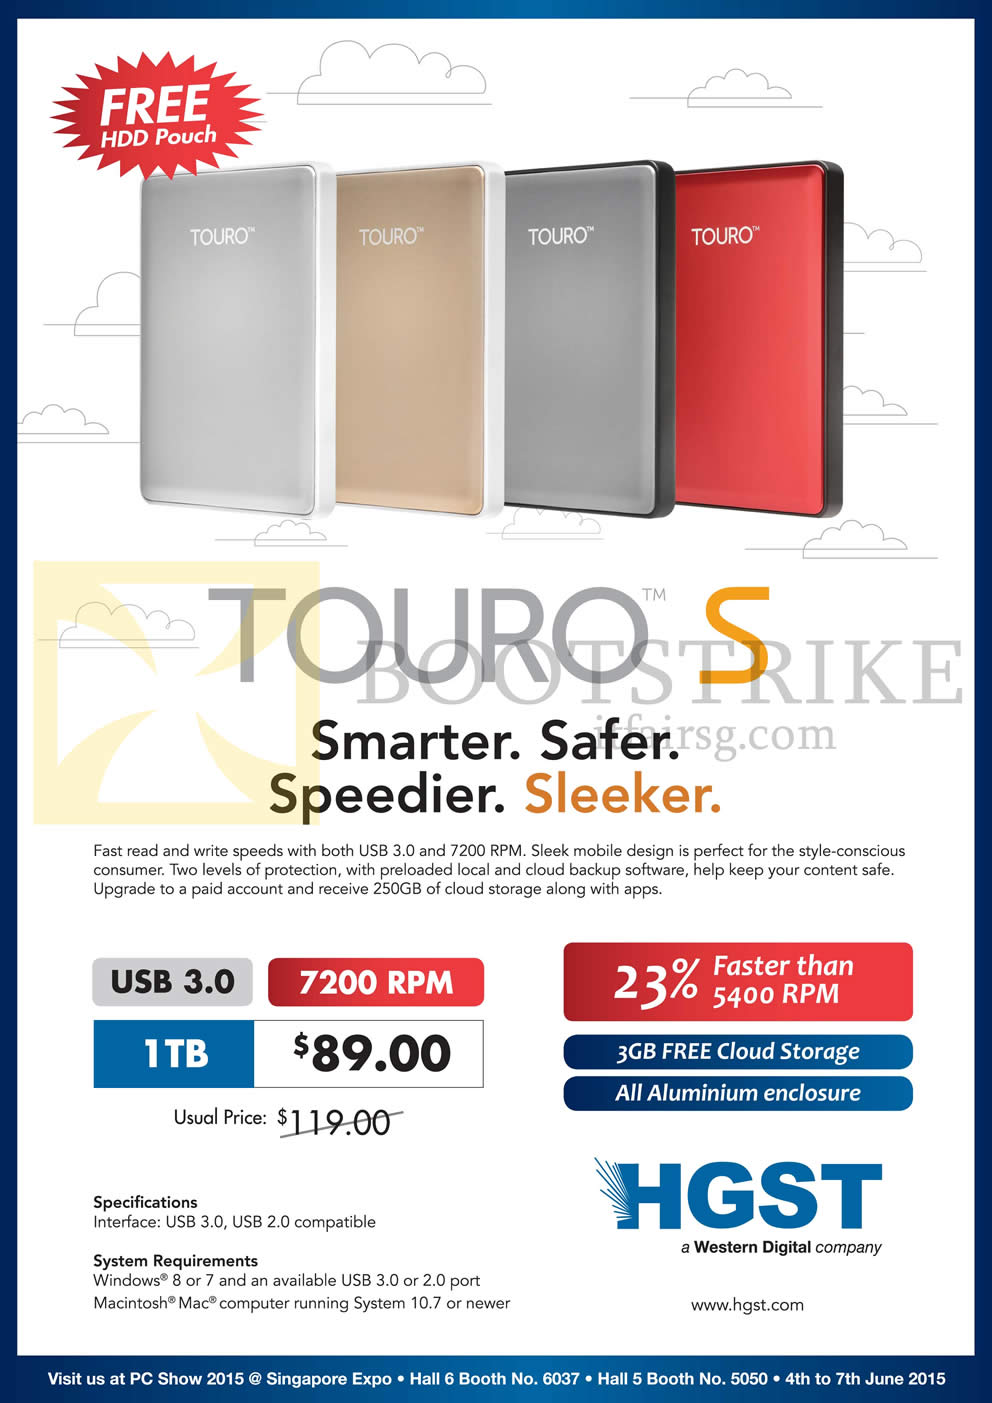 PC SHOW 2015 price list image brochure of HGST Touro S Hard Disk Drive 1TB